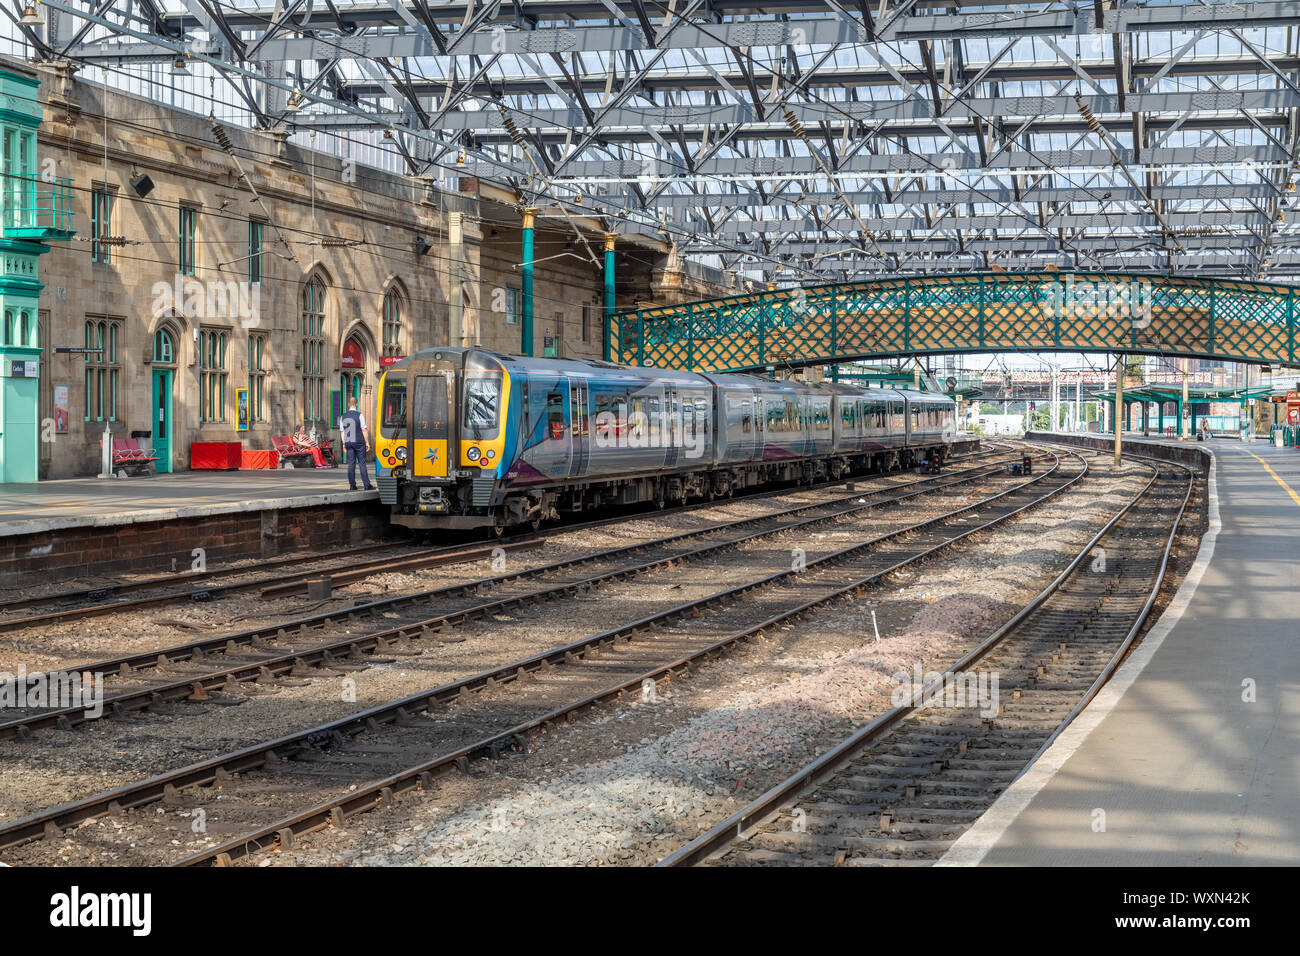 A Class 350 Transpennine Train sitting at platform 3 of the glass roofed Carlisle Station. This train is heading to Edinburgh Waverley station Stock Photo